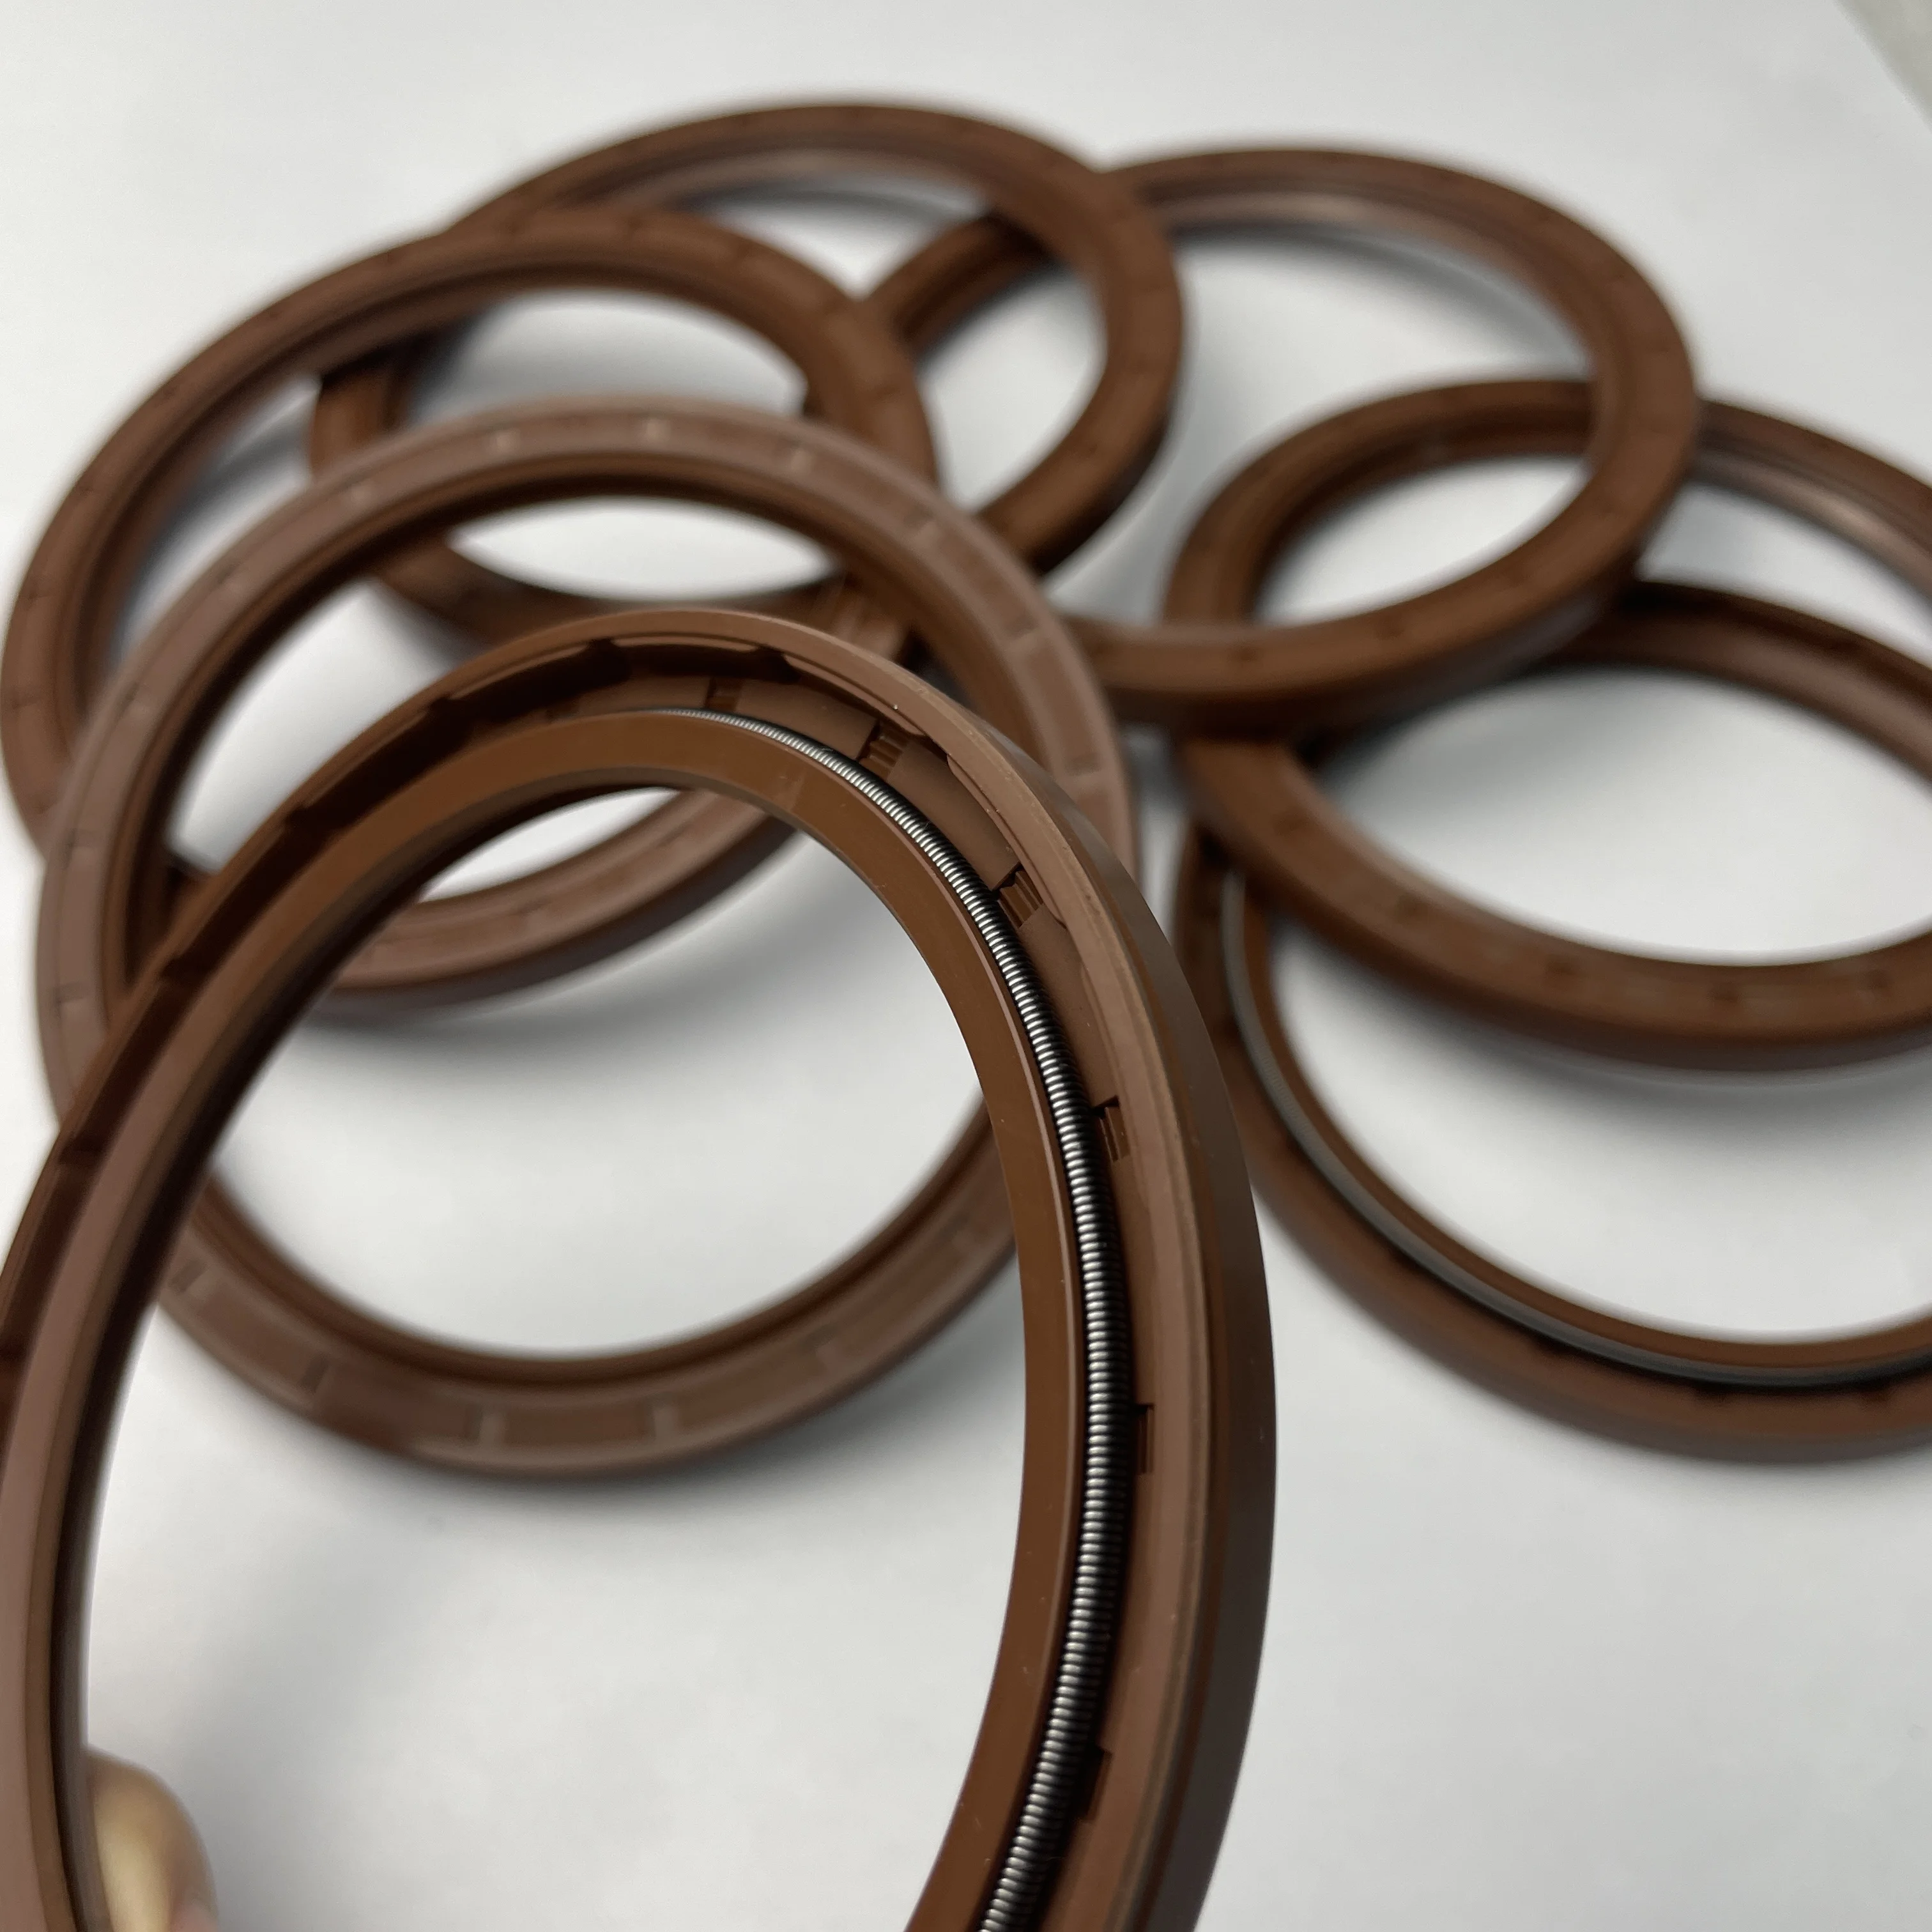 

FKM Rubber NBR Rubber Oil Seal Resistant To High Temperature Acid And Alkali